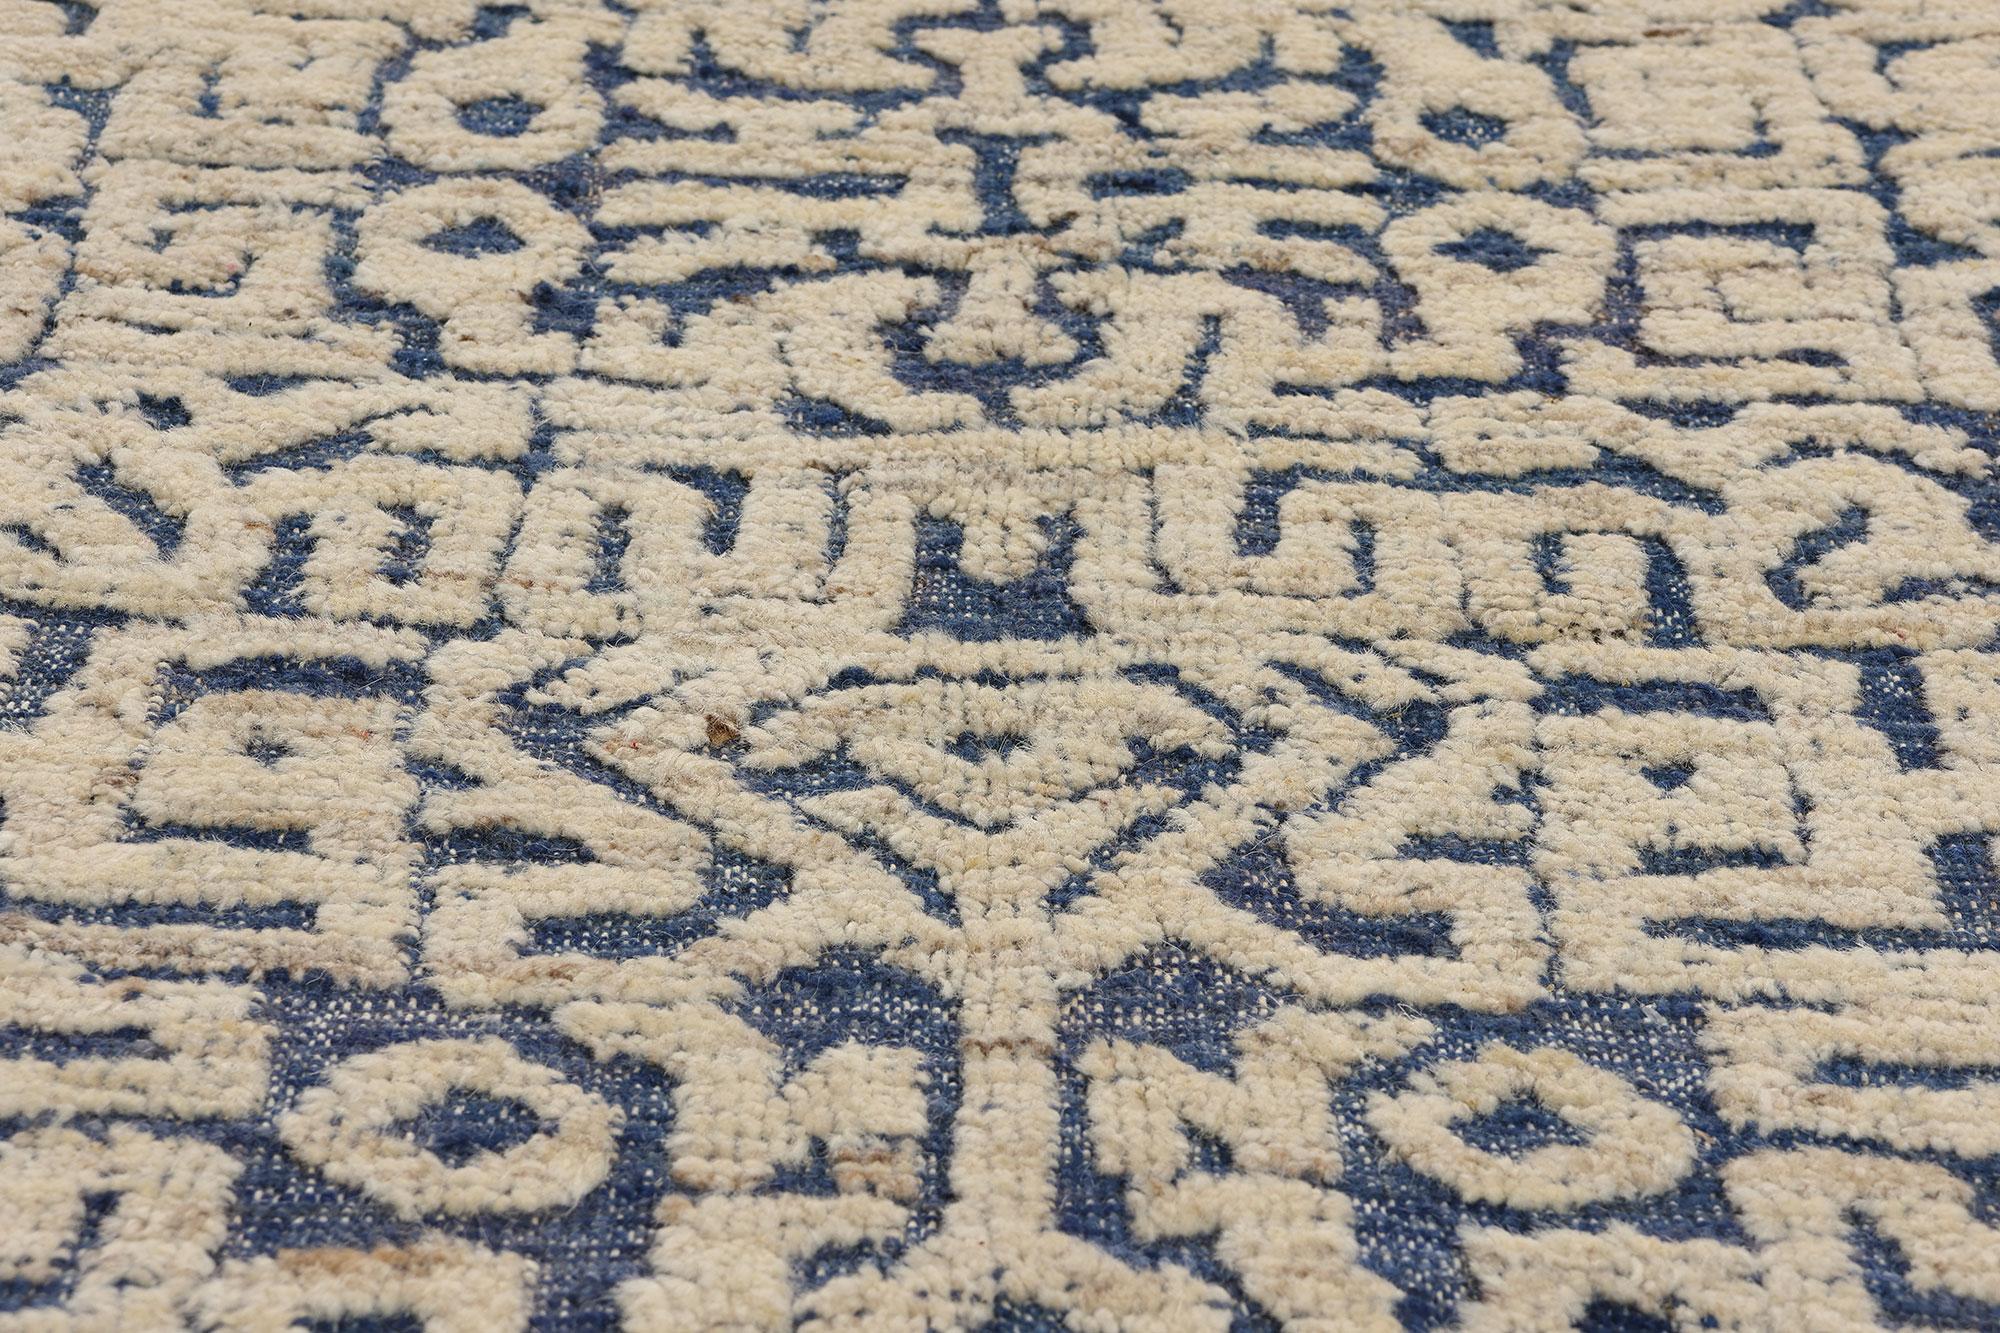 Geometric Moroccan High & Low Wool Pile Rug, Modern Luxe Meets African Artistry In New Condition For Sale In Dallas, TX